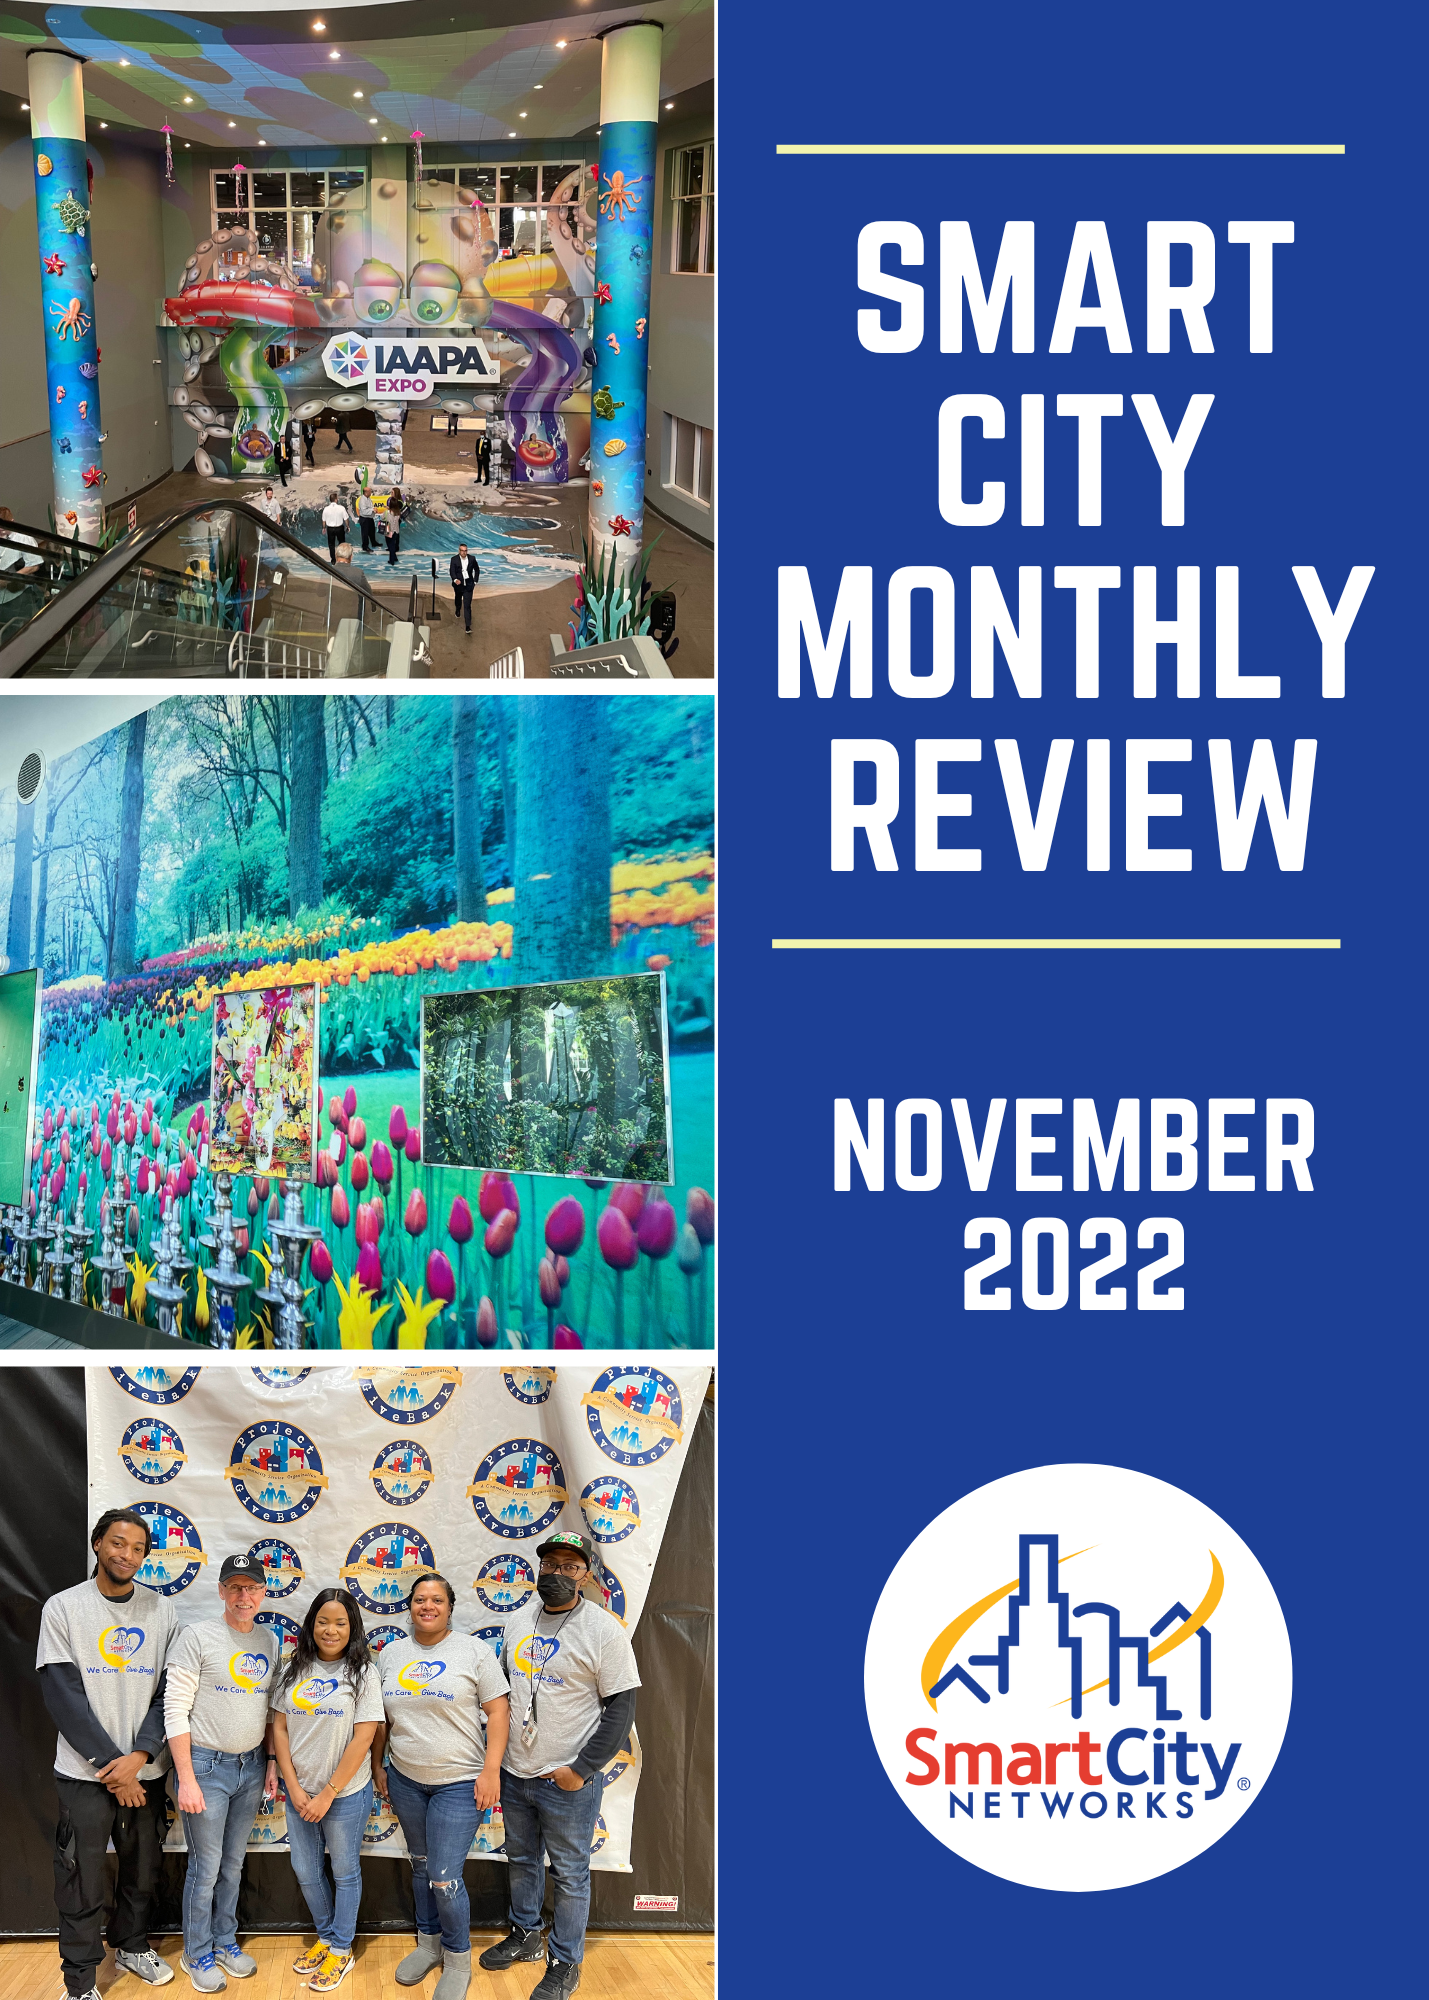 Smart City Networks Month in Review: November 2022